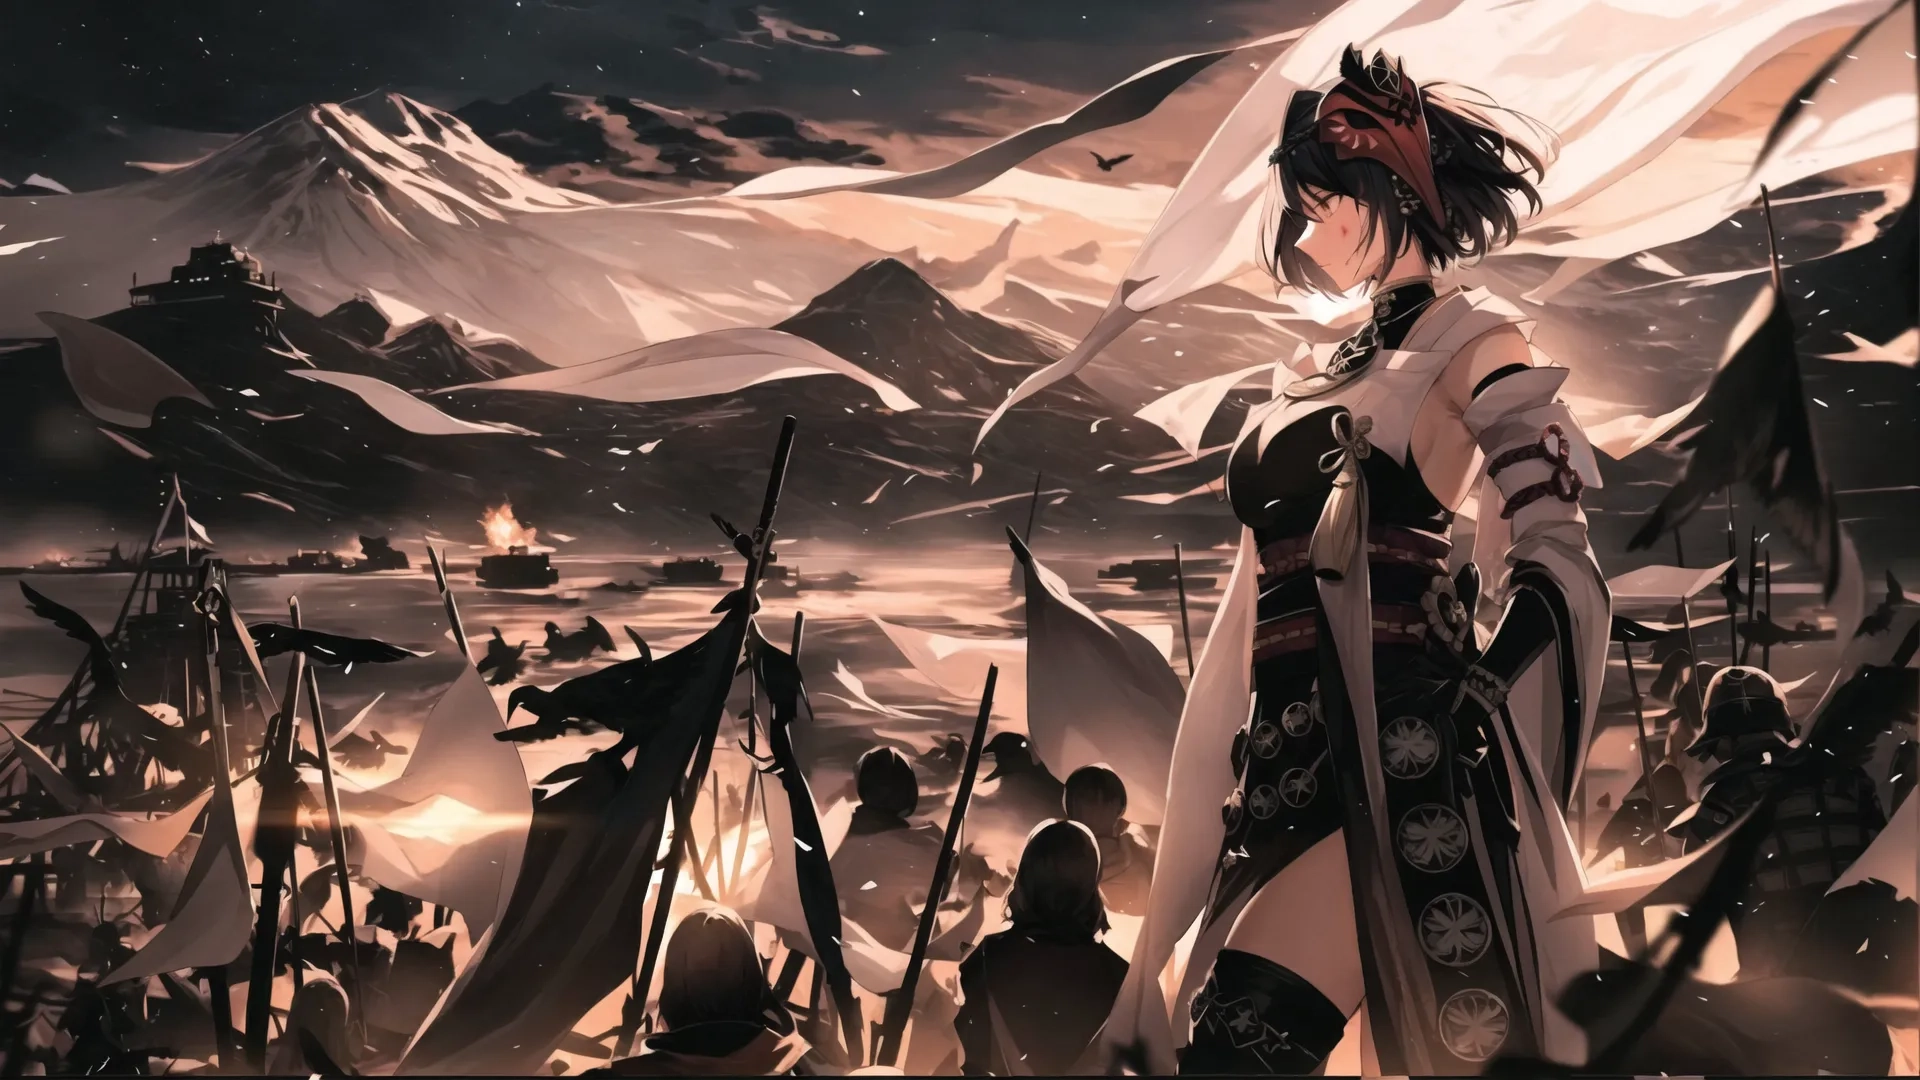 an illustration of an image of some people with armor and a flag in the background of snow mountains in winter time in anime style art
